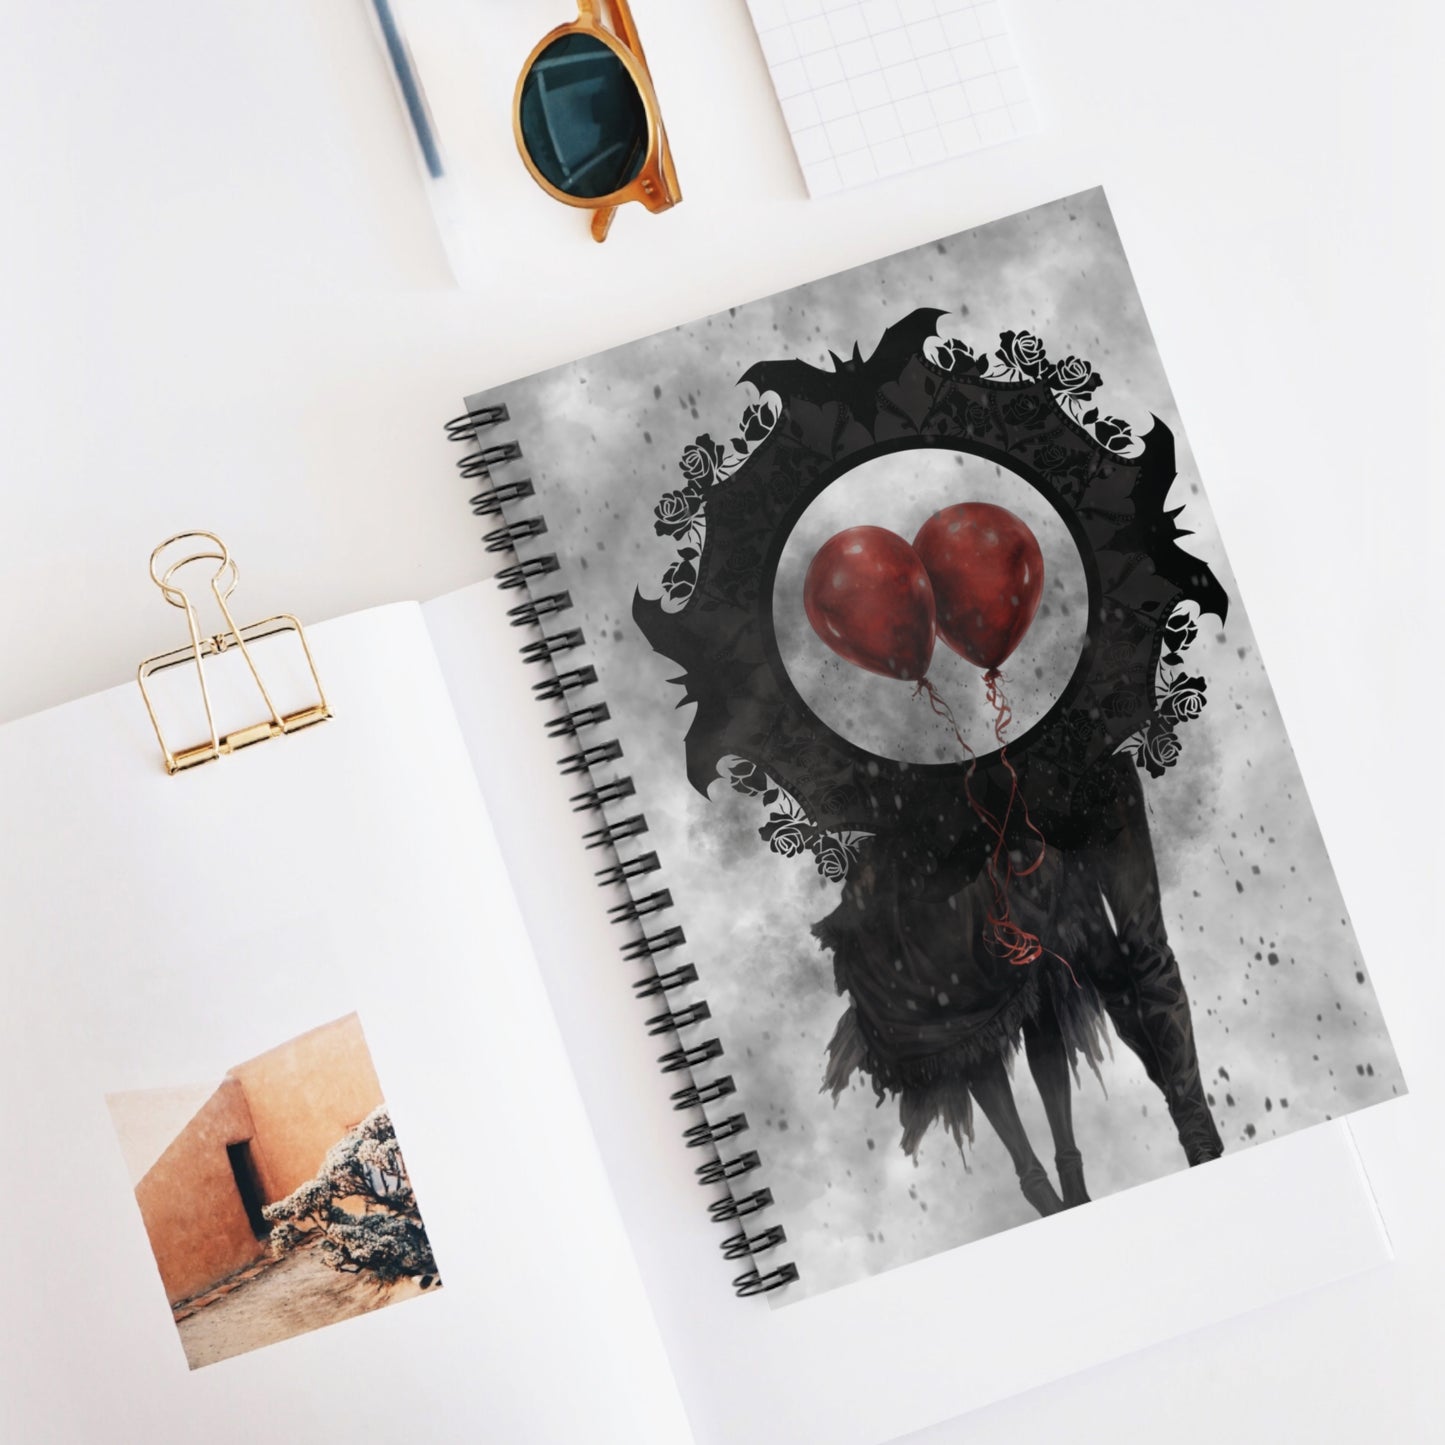 Red Balloon: Spiral Notebook - Log Books - Journals - Diaries - and More Custom Printed by TheGlassyLass